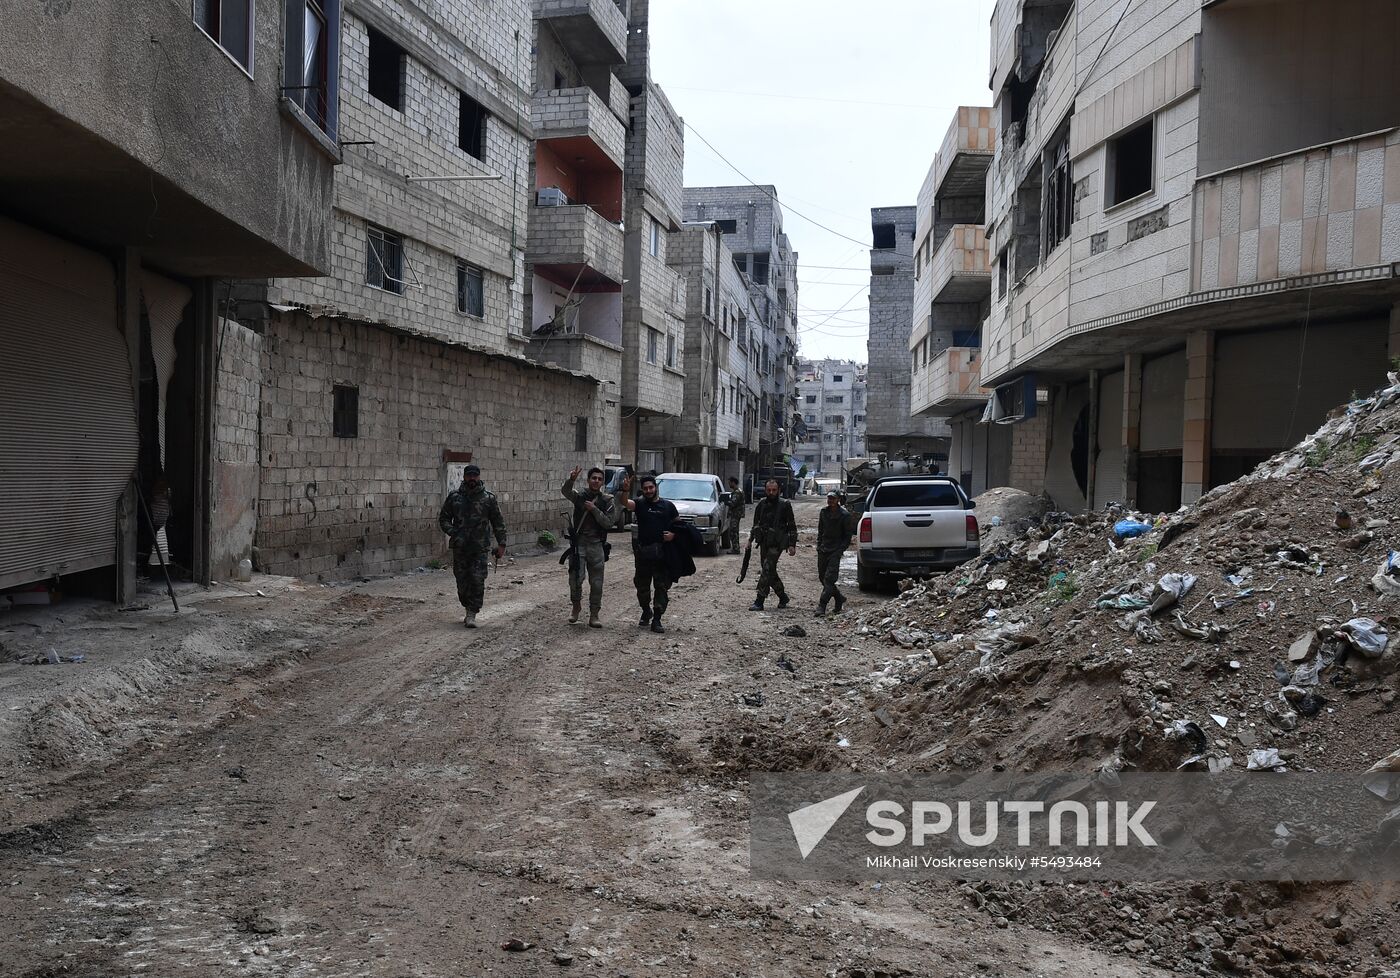 Situation in Yarmouk refugee camp area in southern Damascus suburb